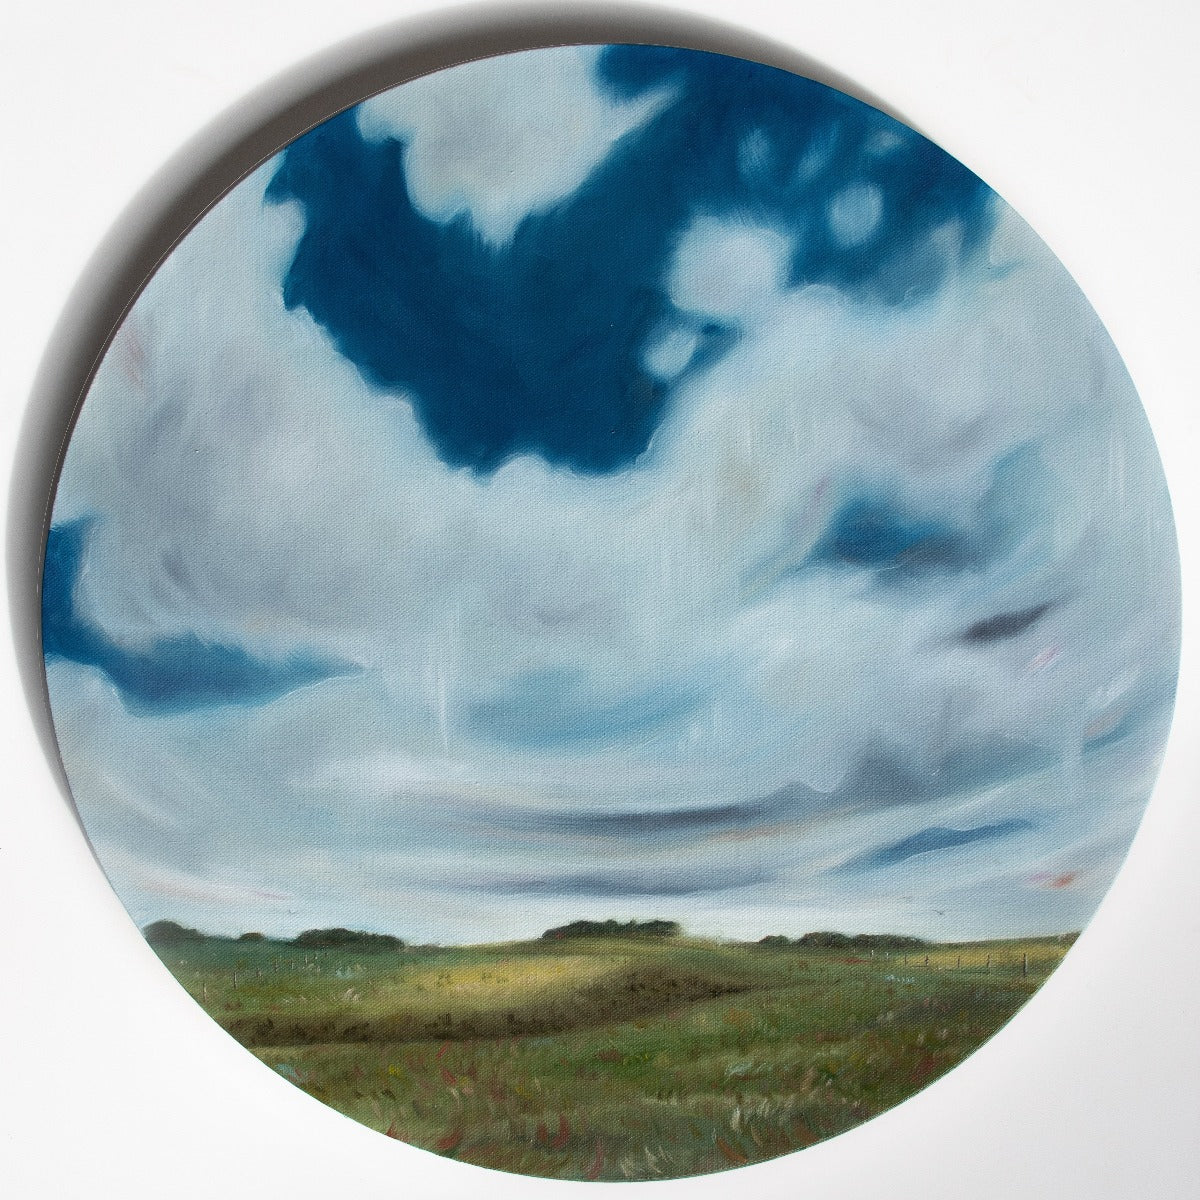 The road home is a round oil painting showing a dramatic soaring sky above a rolling farm landscape. The grasses are swept by the wind with a fenceline marching into the distance and trees on the horizon.